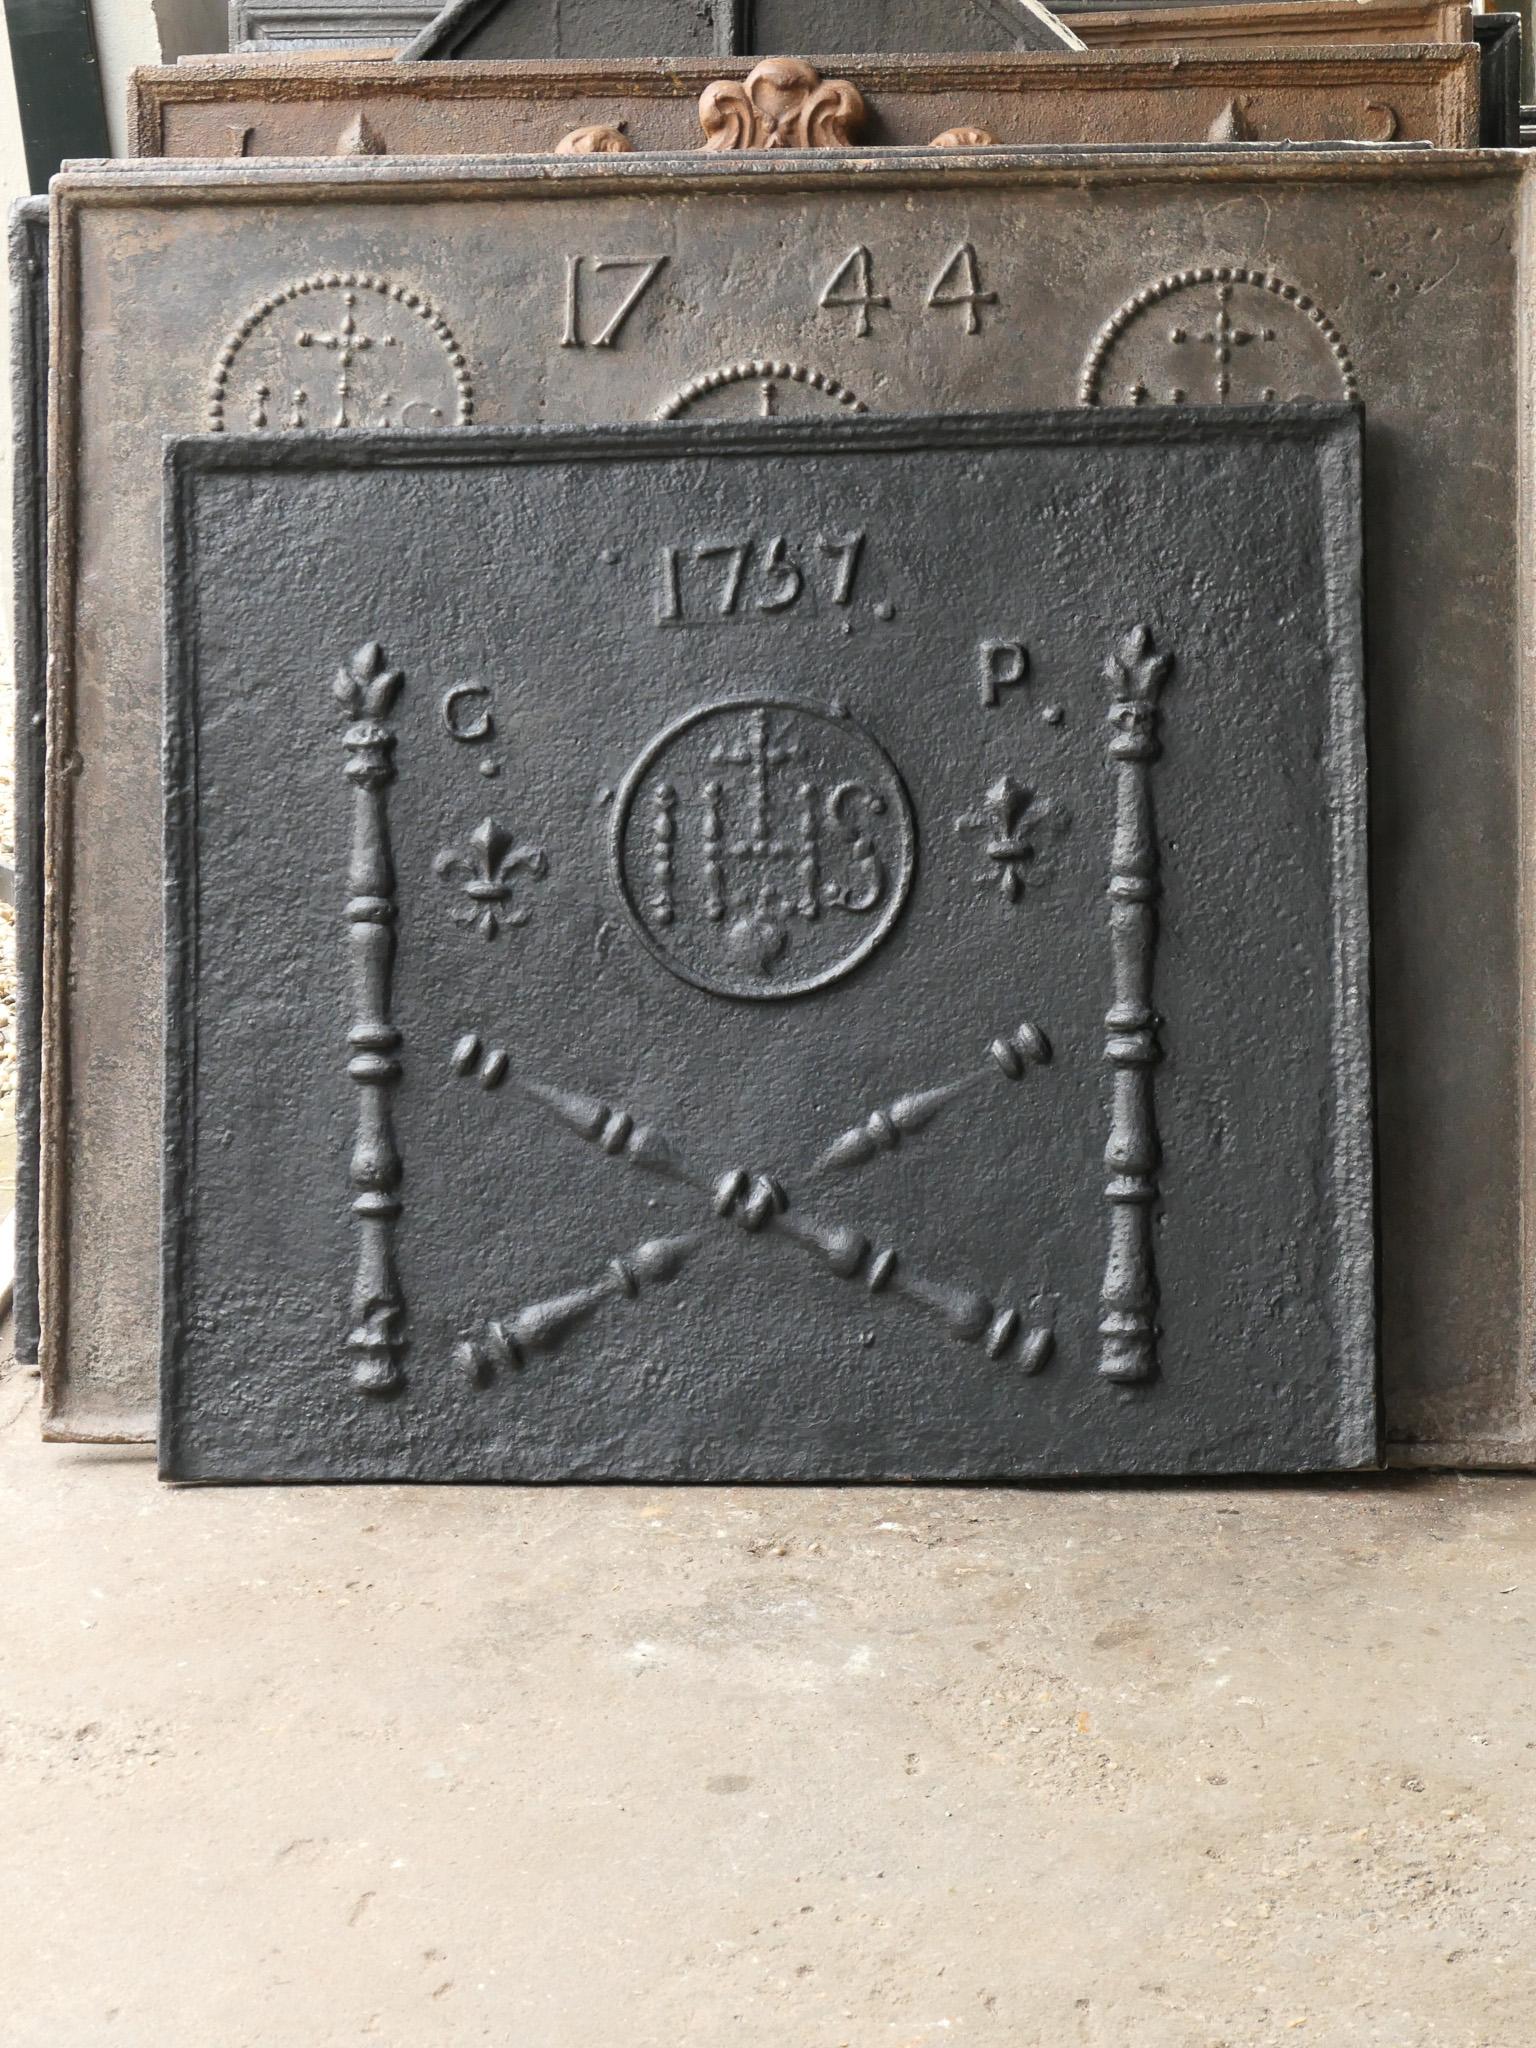 18th century French Louis XV fireback with two pillars, a IHS monogram, a cross, and the date of production 1757.

The monogram IHS stands for Iesus Hominum Salvator (Jesus the Savior of Humanity) or In Hoc Signo (In this sign will you win). The